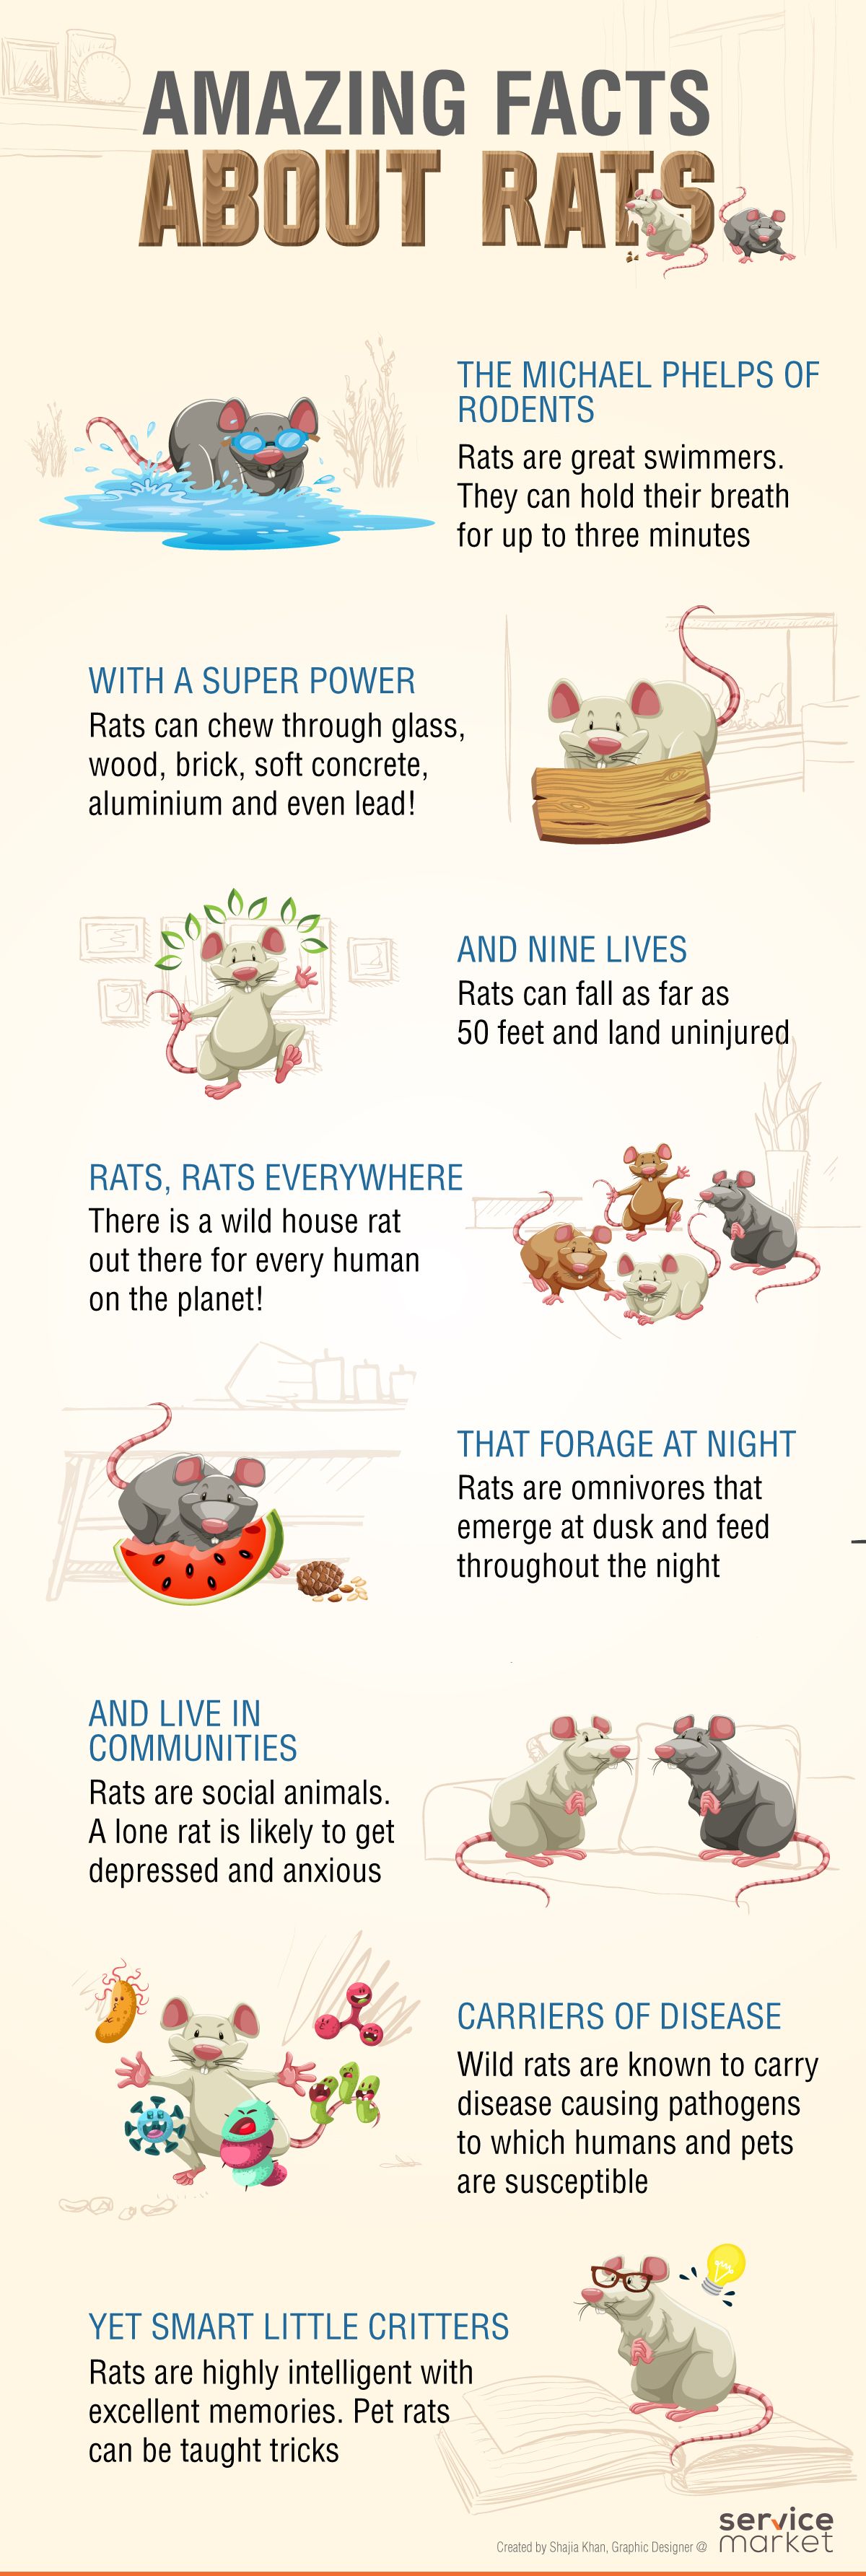 Amazing Facts About Rats in Dubai